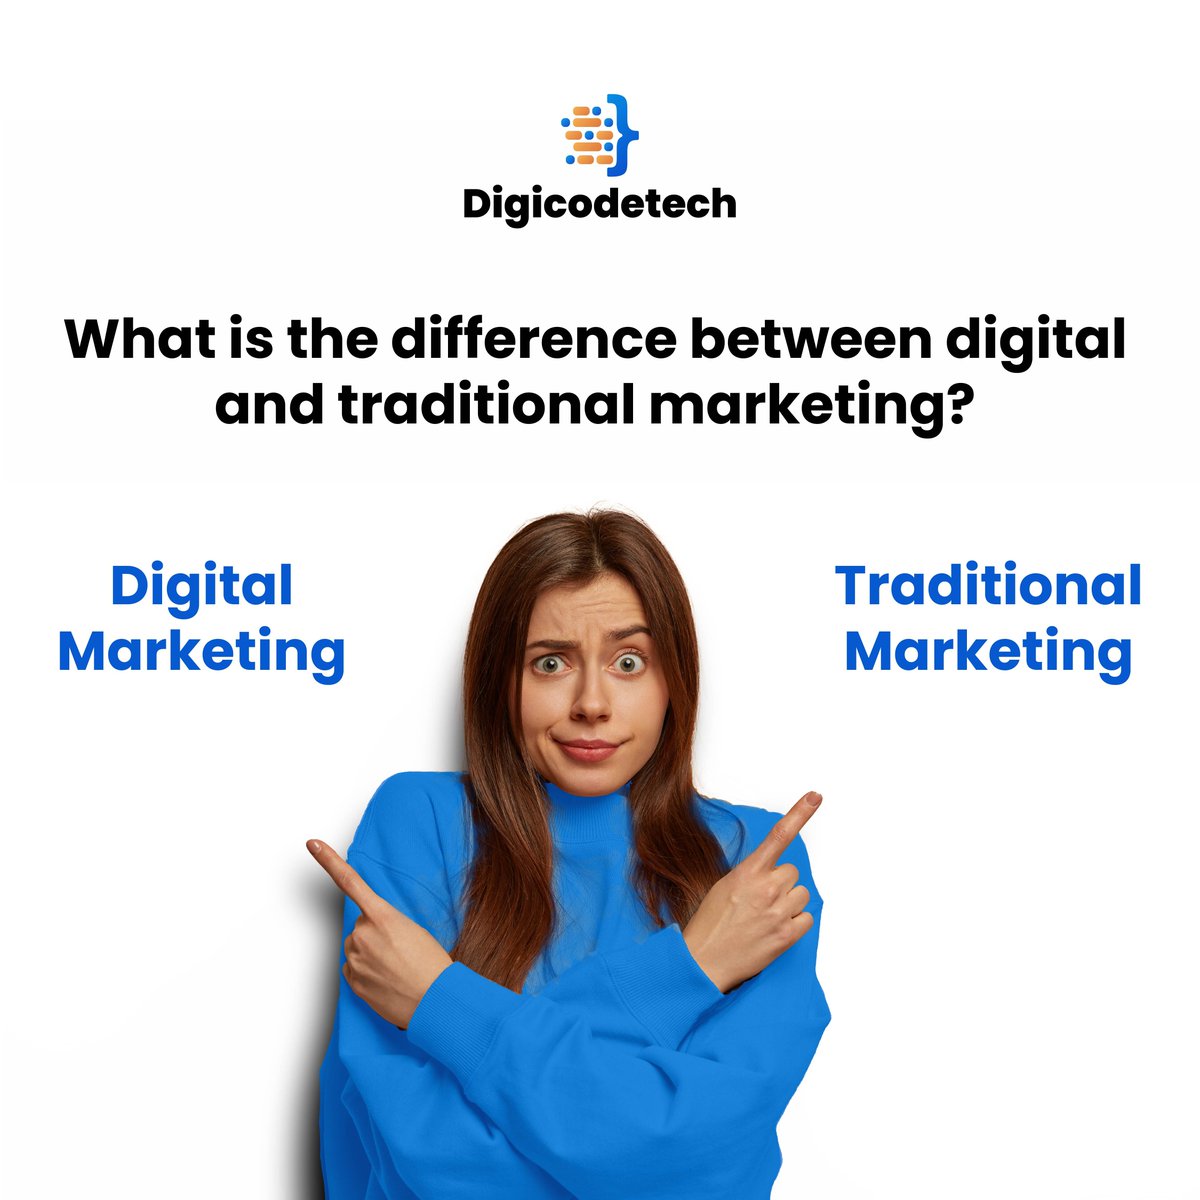 Ready to take your marketing to the next level? Let's embark on a digital marketing journey and unlock the full potential of your business!💪

#DigitalMarketing #TraditionalMarketing #DigitalTransformation #TargetedReach #CostEffectiveness #RealTimeEngagement #DataDrivenInsights